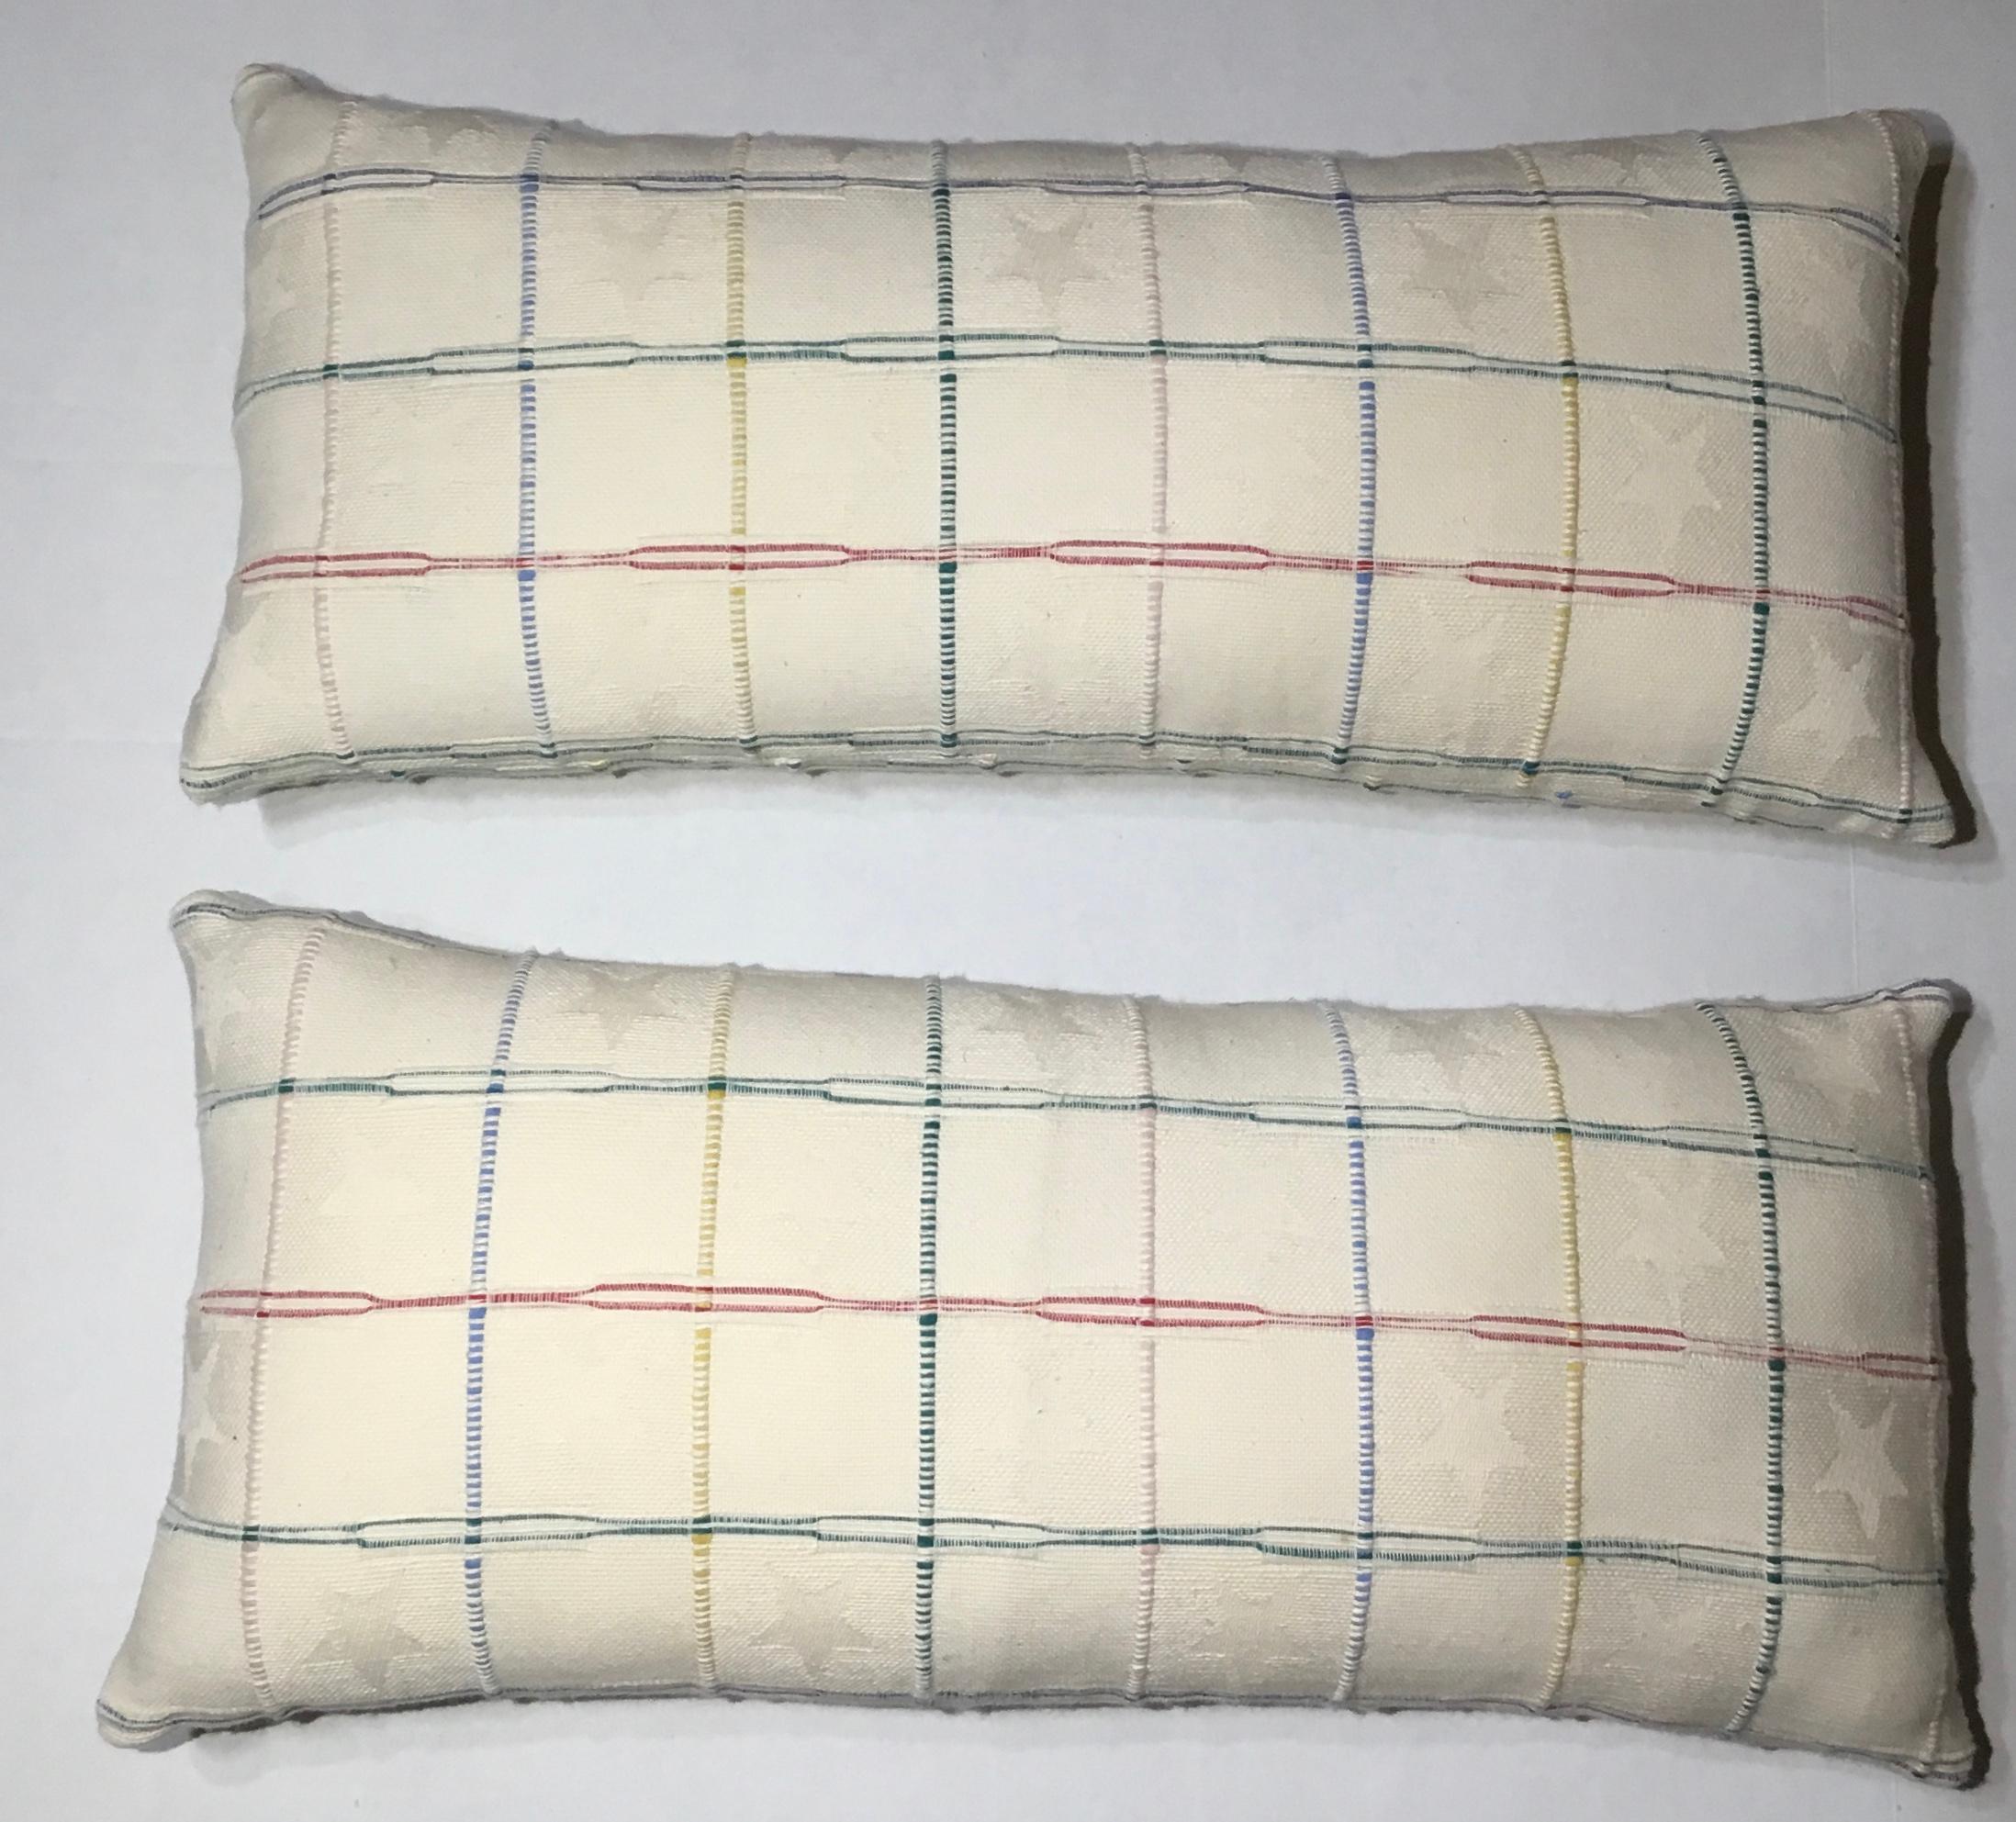 Beautiful pair of pillows made of quality French textile, texture geometric motifs of soft colors on
White -cream color all on both sides back and front. Frash new inserts.